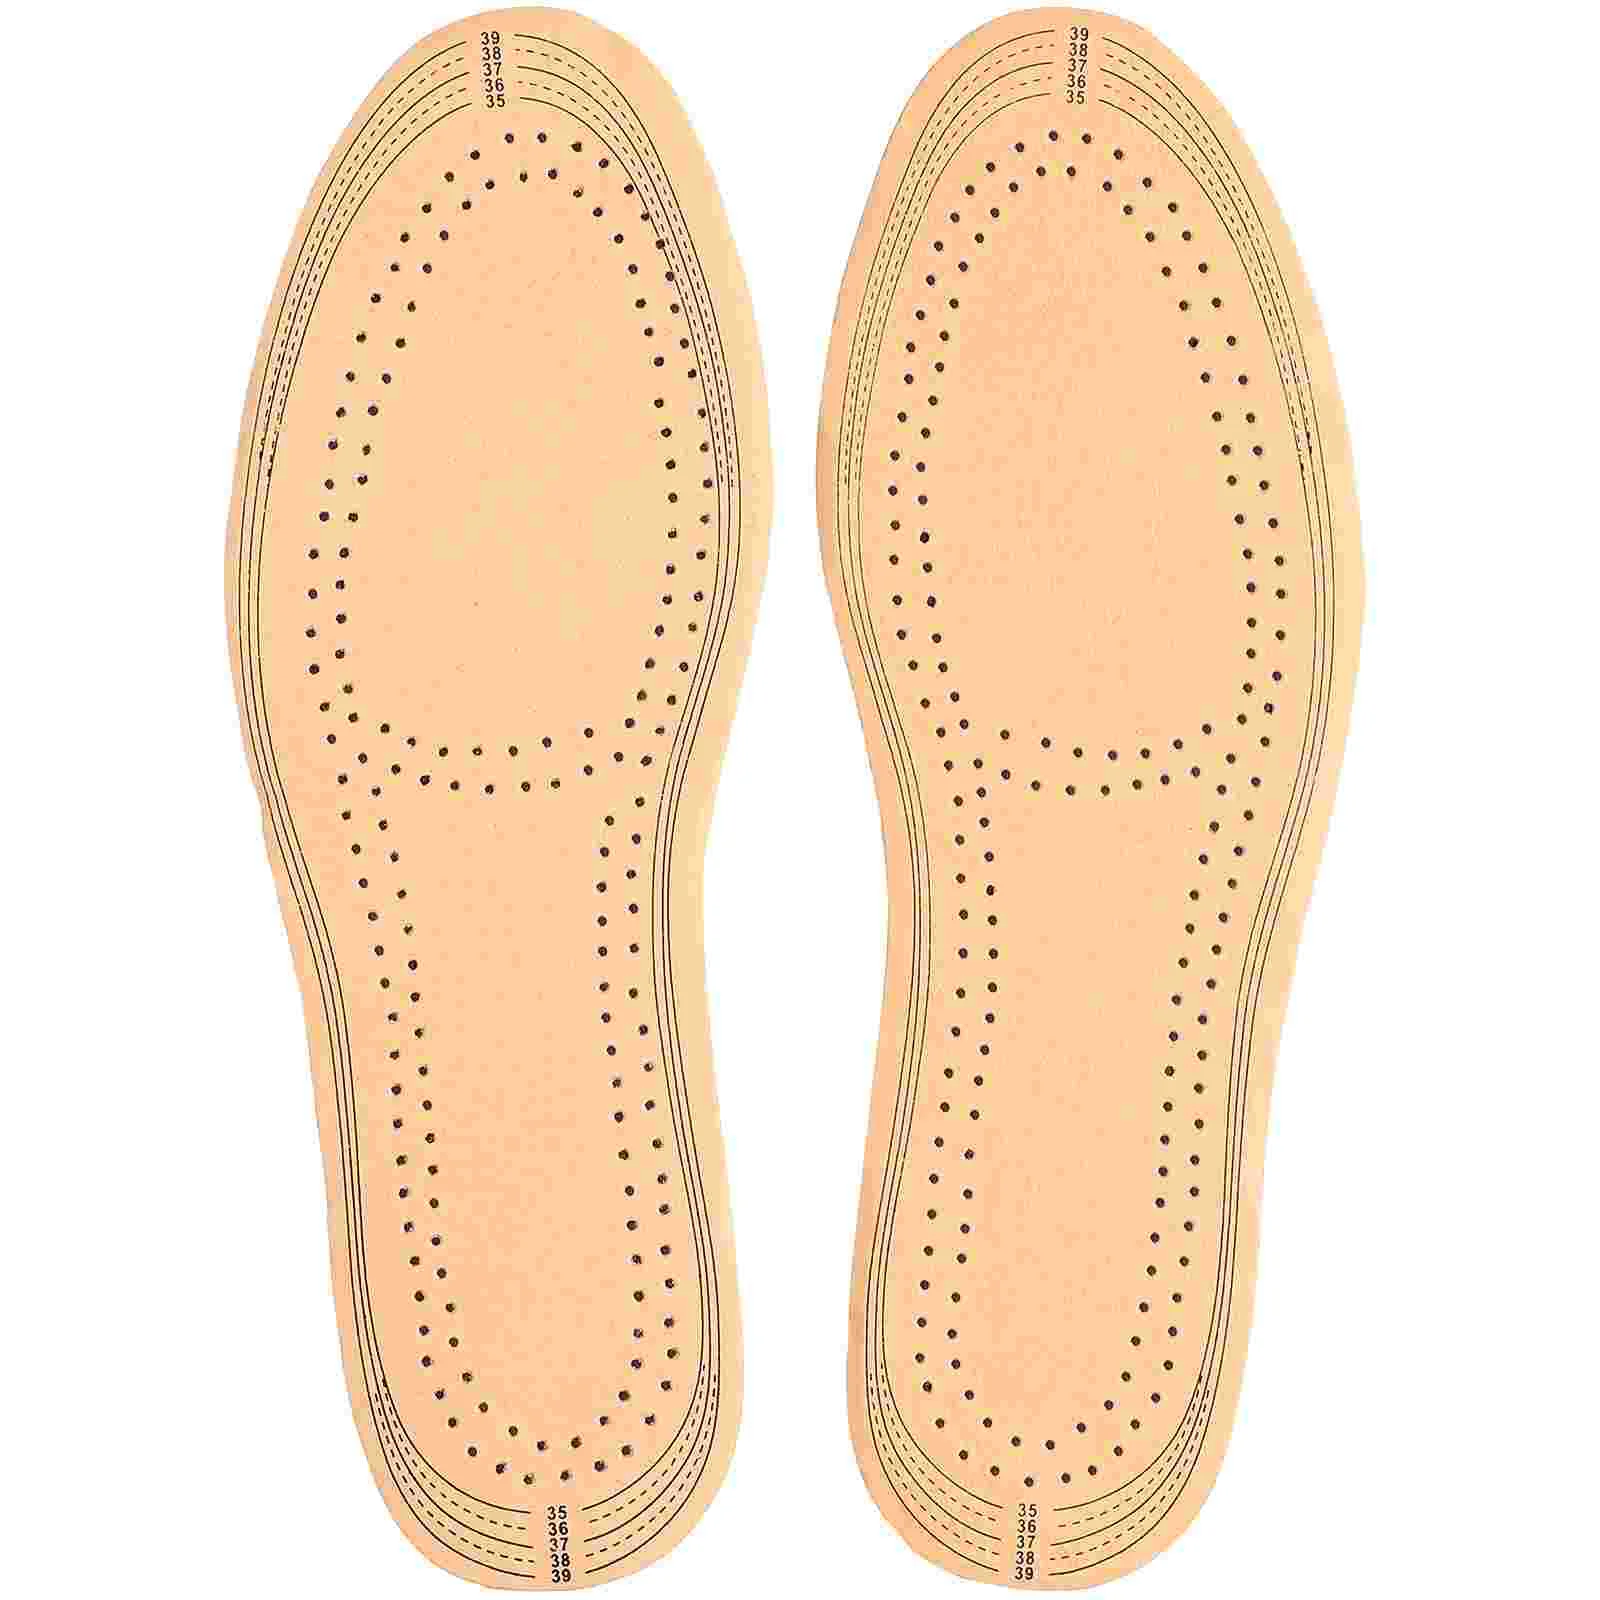 Shoe Inserts Sheepskin Insoles for Men Orthopedic Grip Pad Women Thin Replacement Man ergonomic designed remote control brc0984502 01 replacement remote controller comfortable grip responsive commands